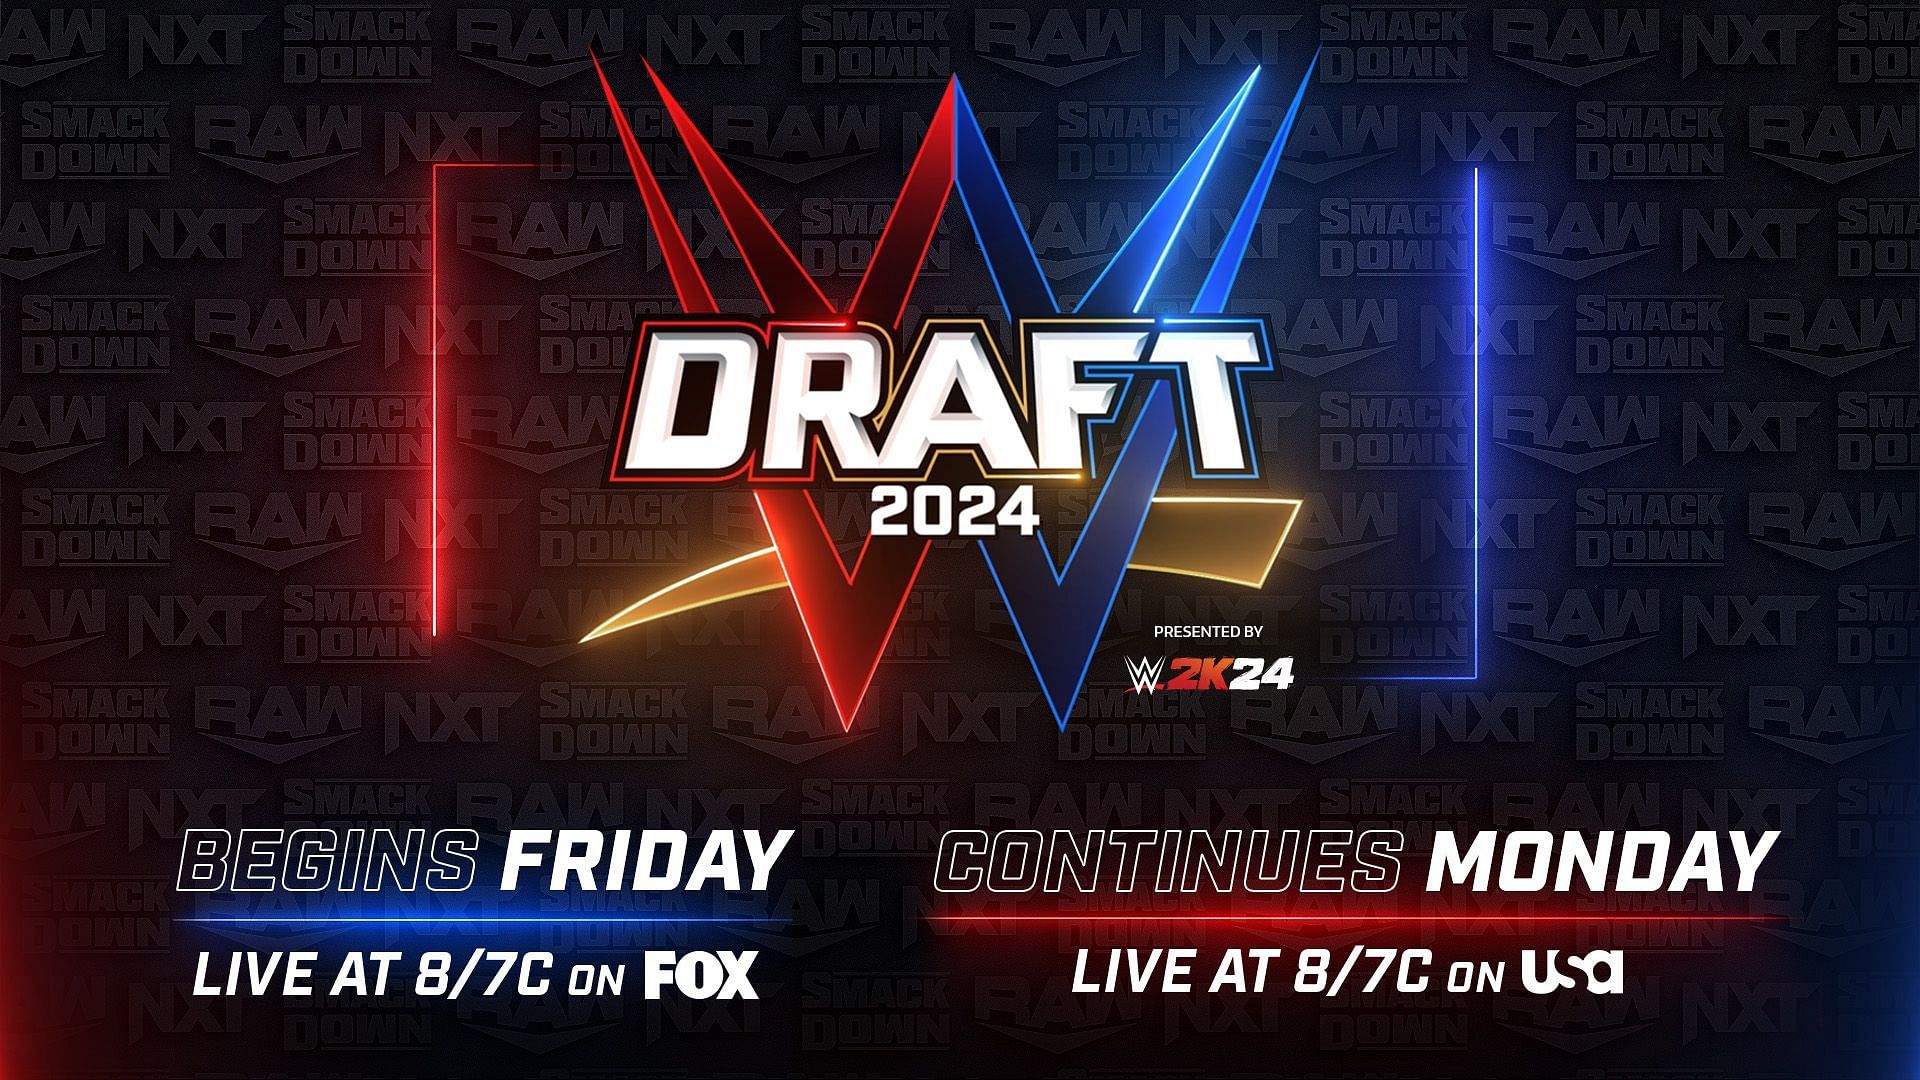 The official promotional banner for the 2024 WWE Draft